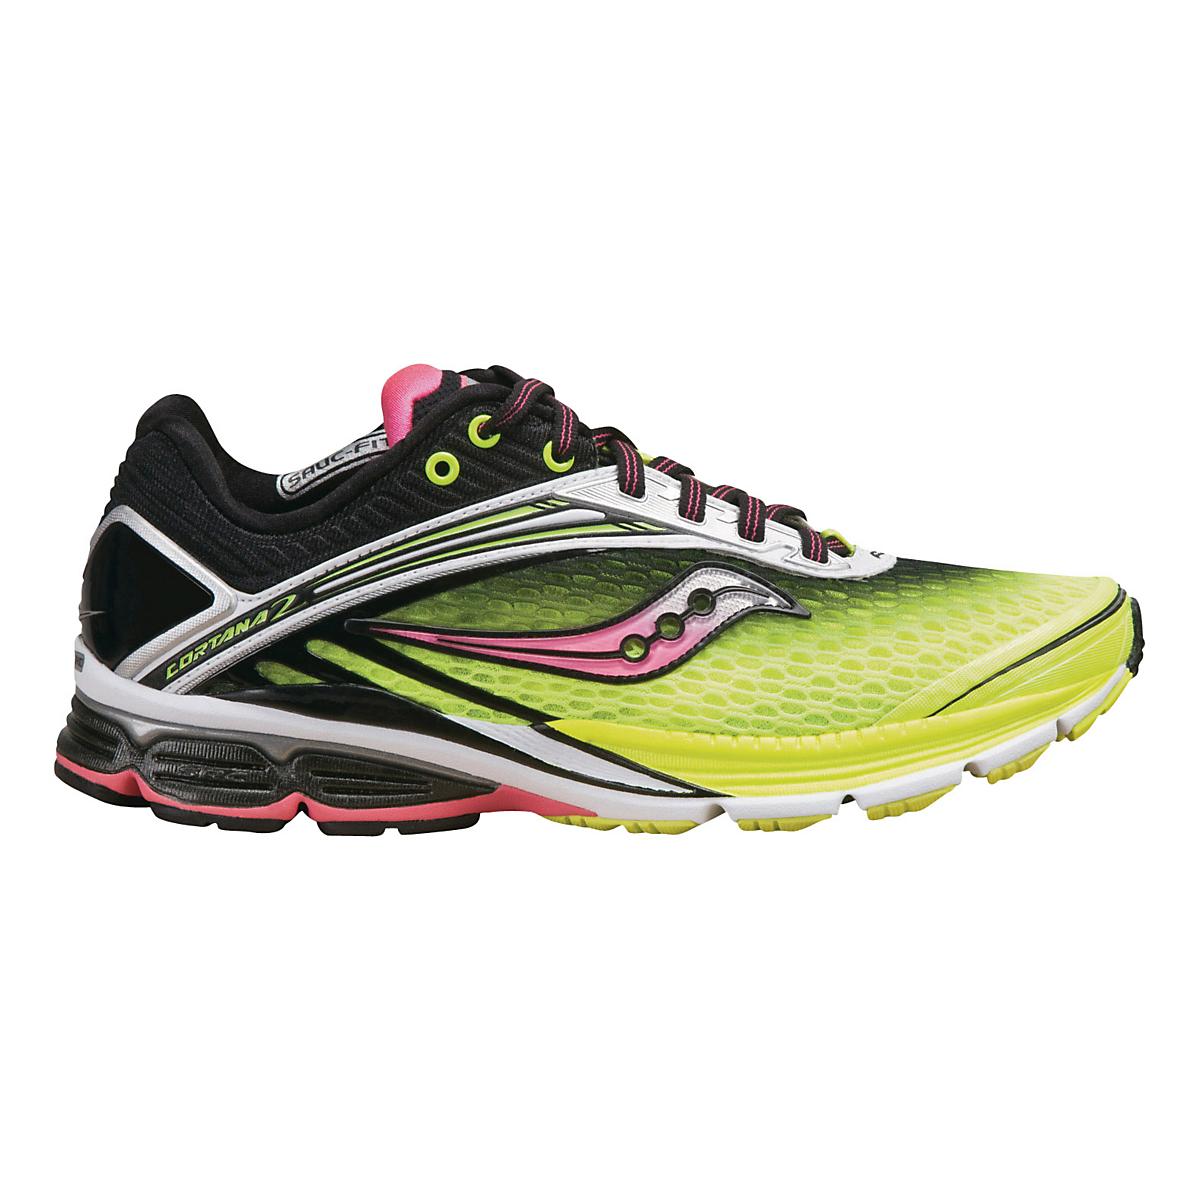 Womens Saucony Triumph 11 Running Shoe at Road Runner Sports